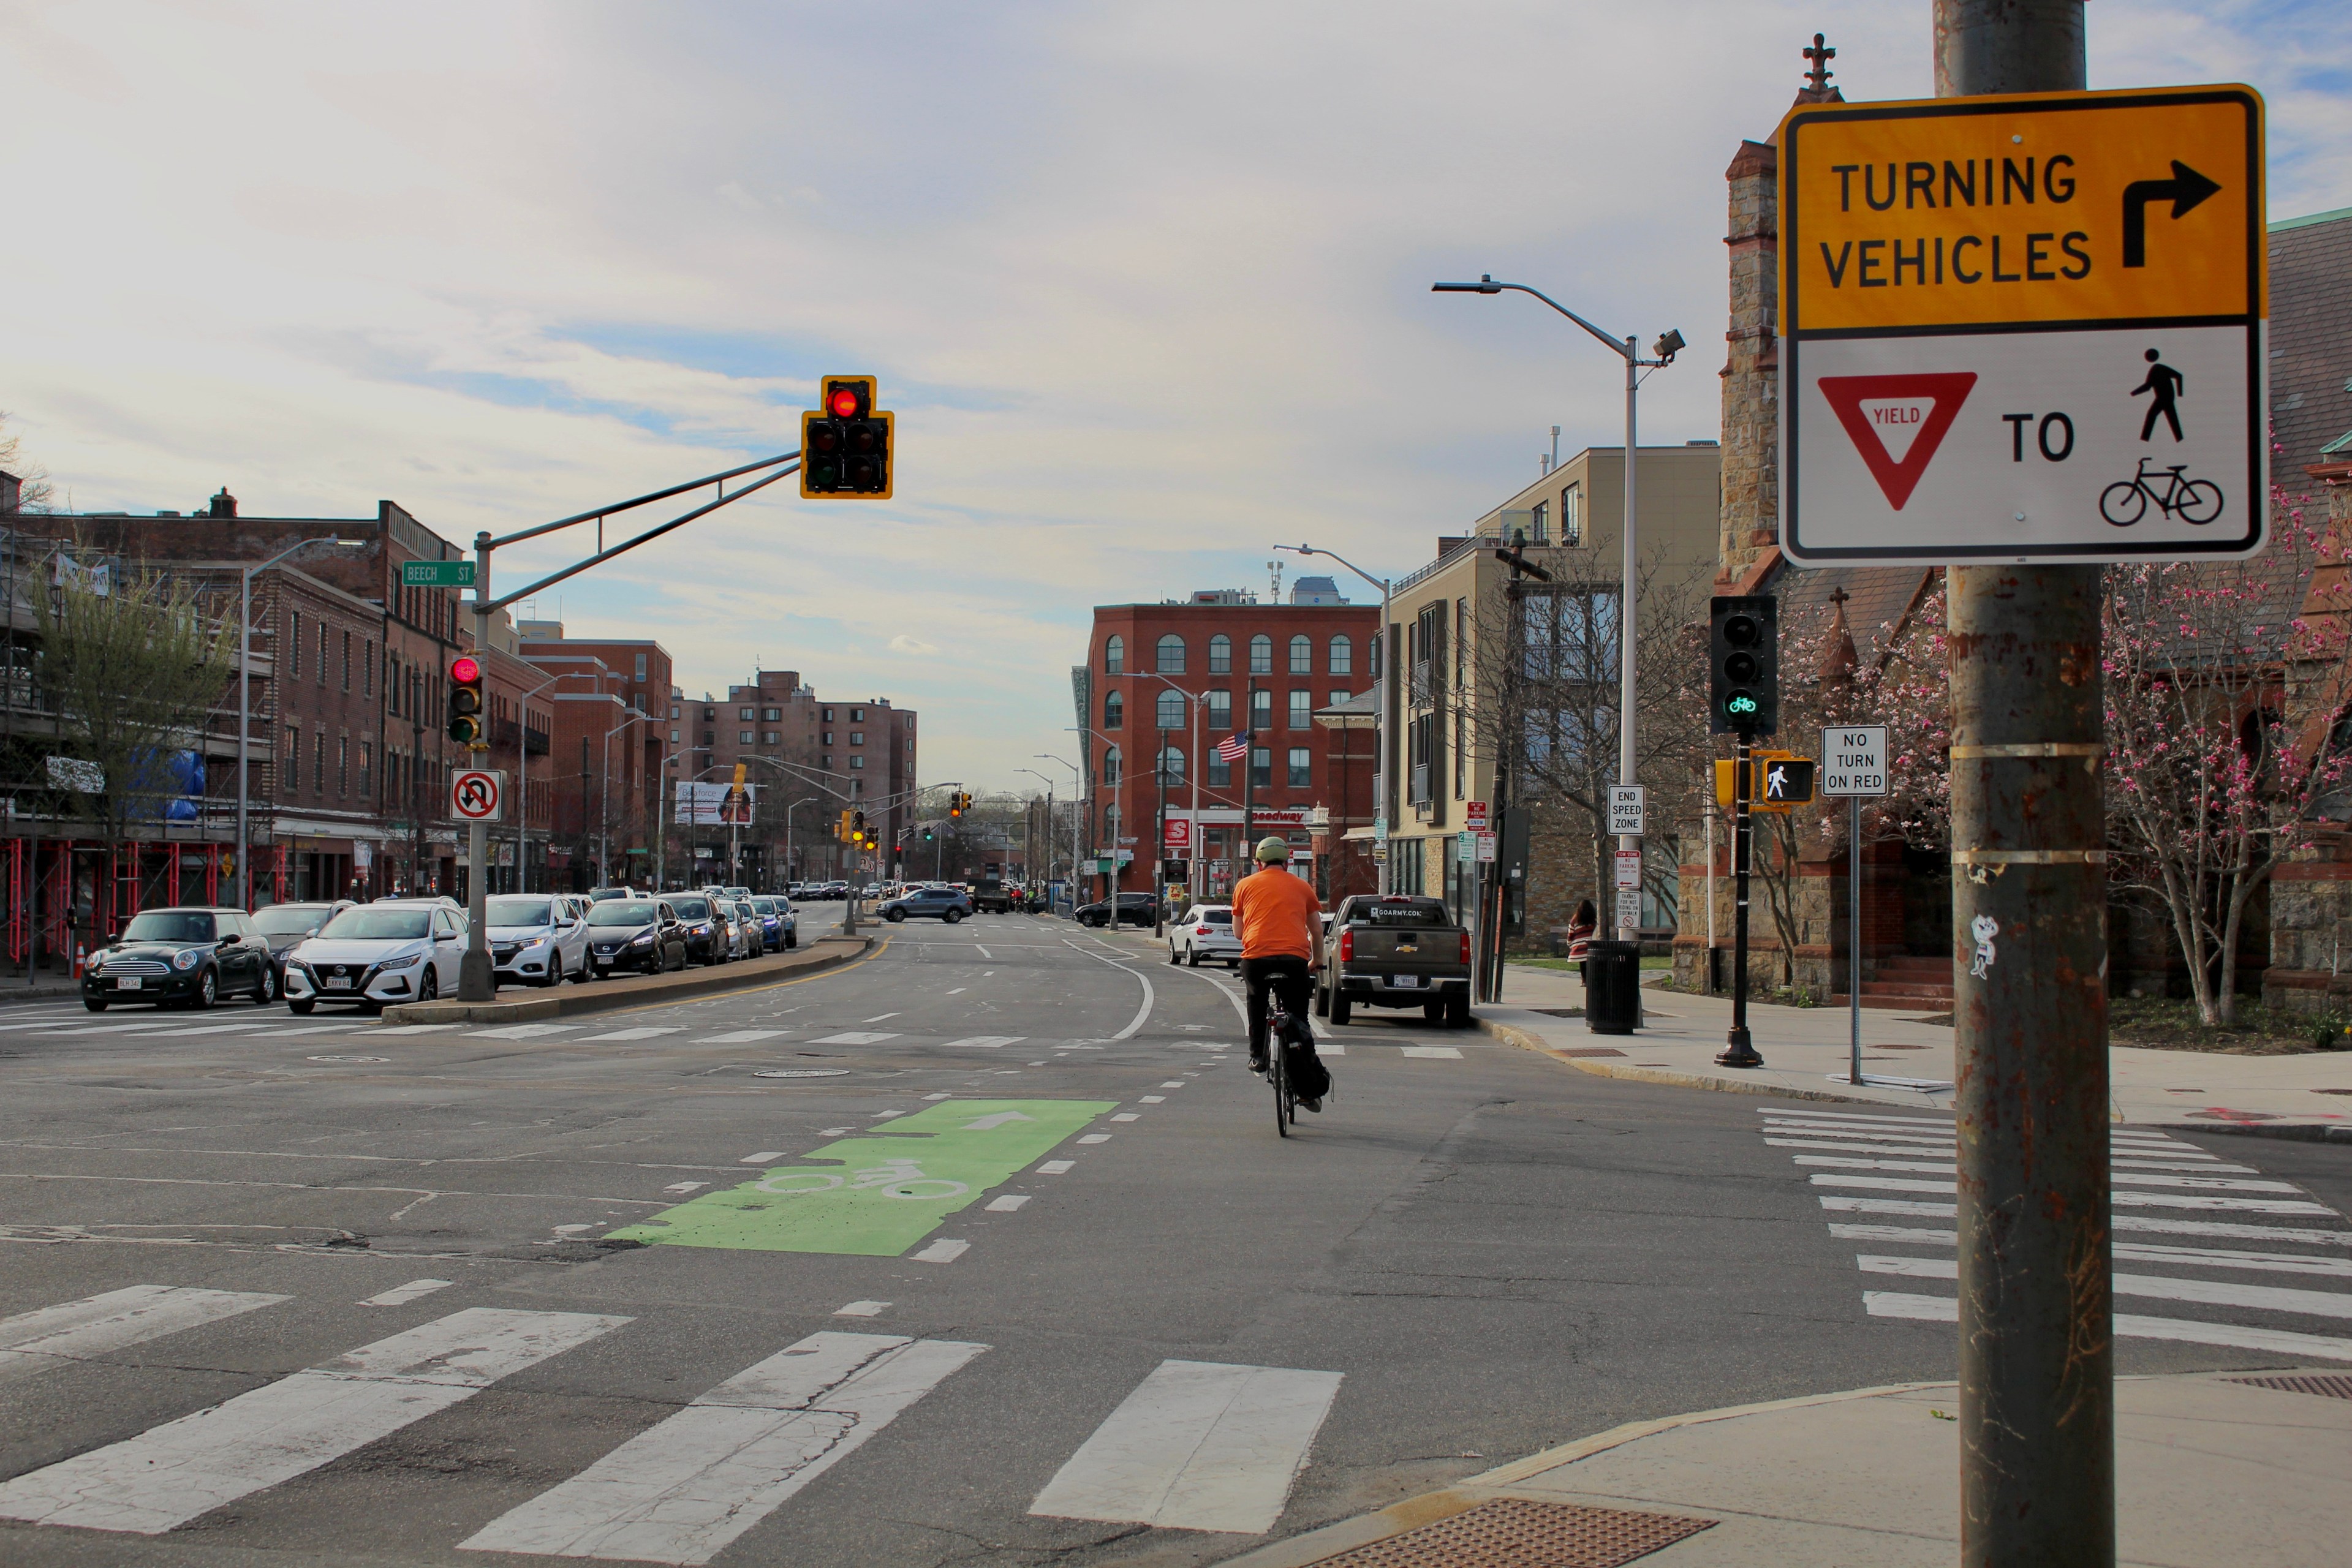 A person on a bike rides past a green bike signal alongside a walk sign while roughly a dozen cars wait at a red light on the opposite side of the street. A sign in the foreground reads "Turning vehicles yield to [bike and pedestrian pictograms]" while a sign next to the walk signal says "No Turn On Red." The street is lined with 3-5 story brick buildings.